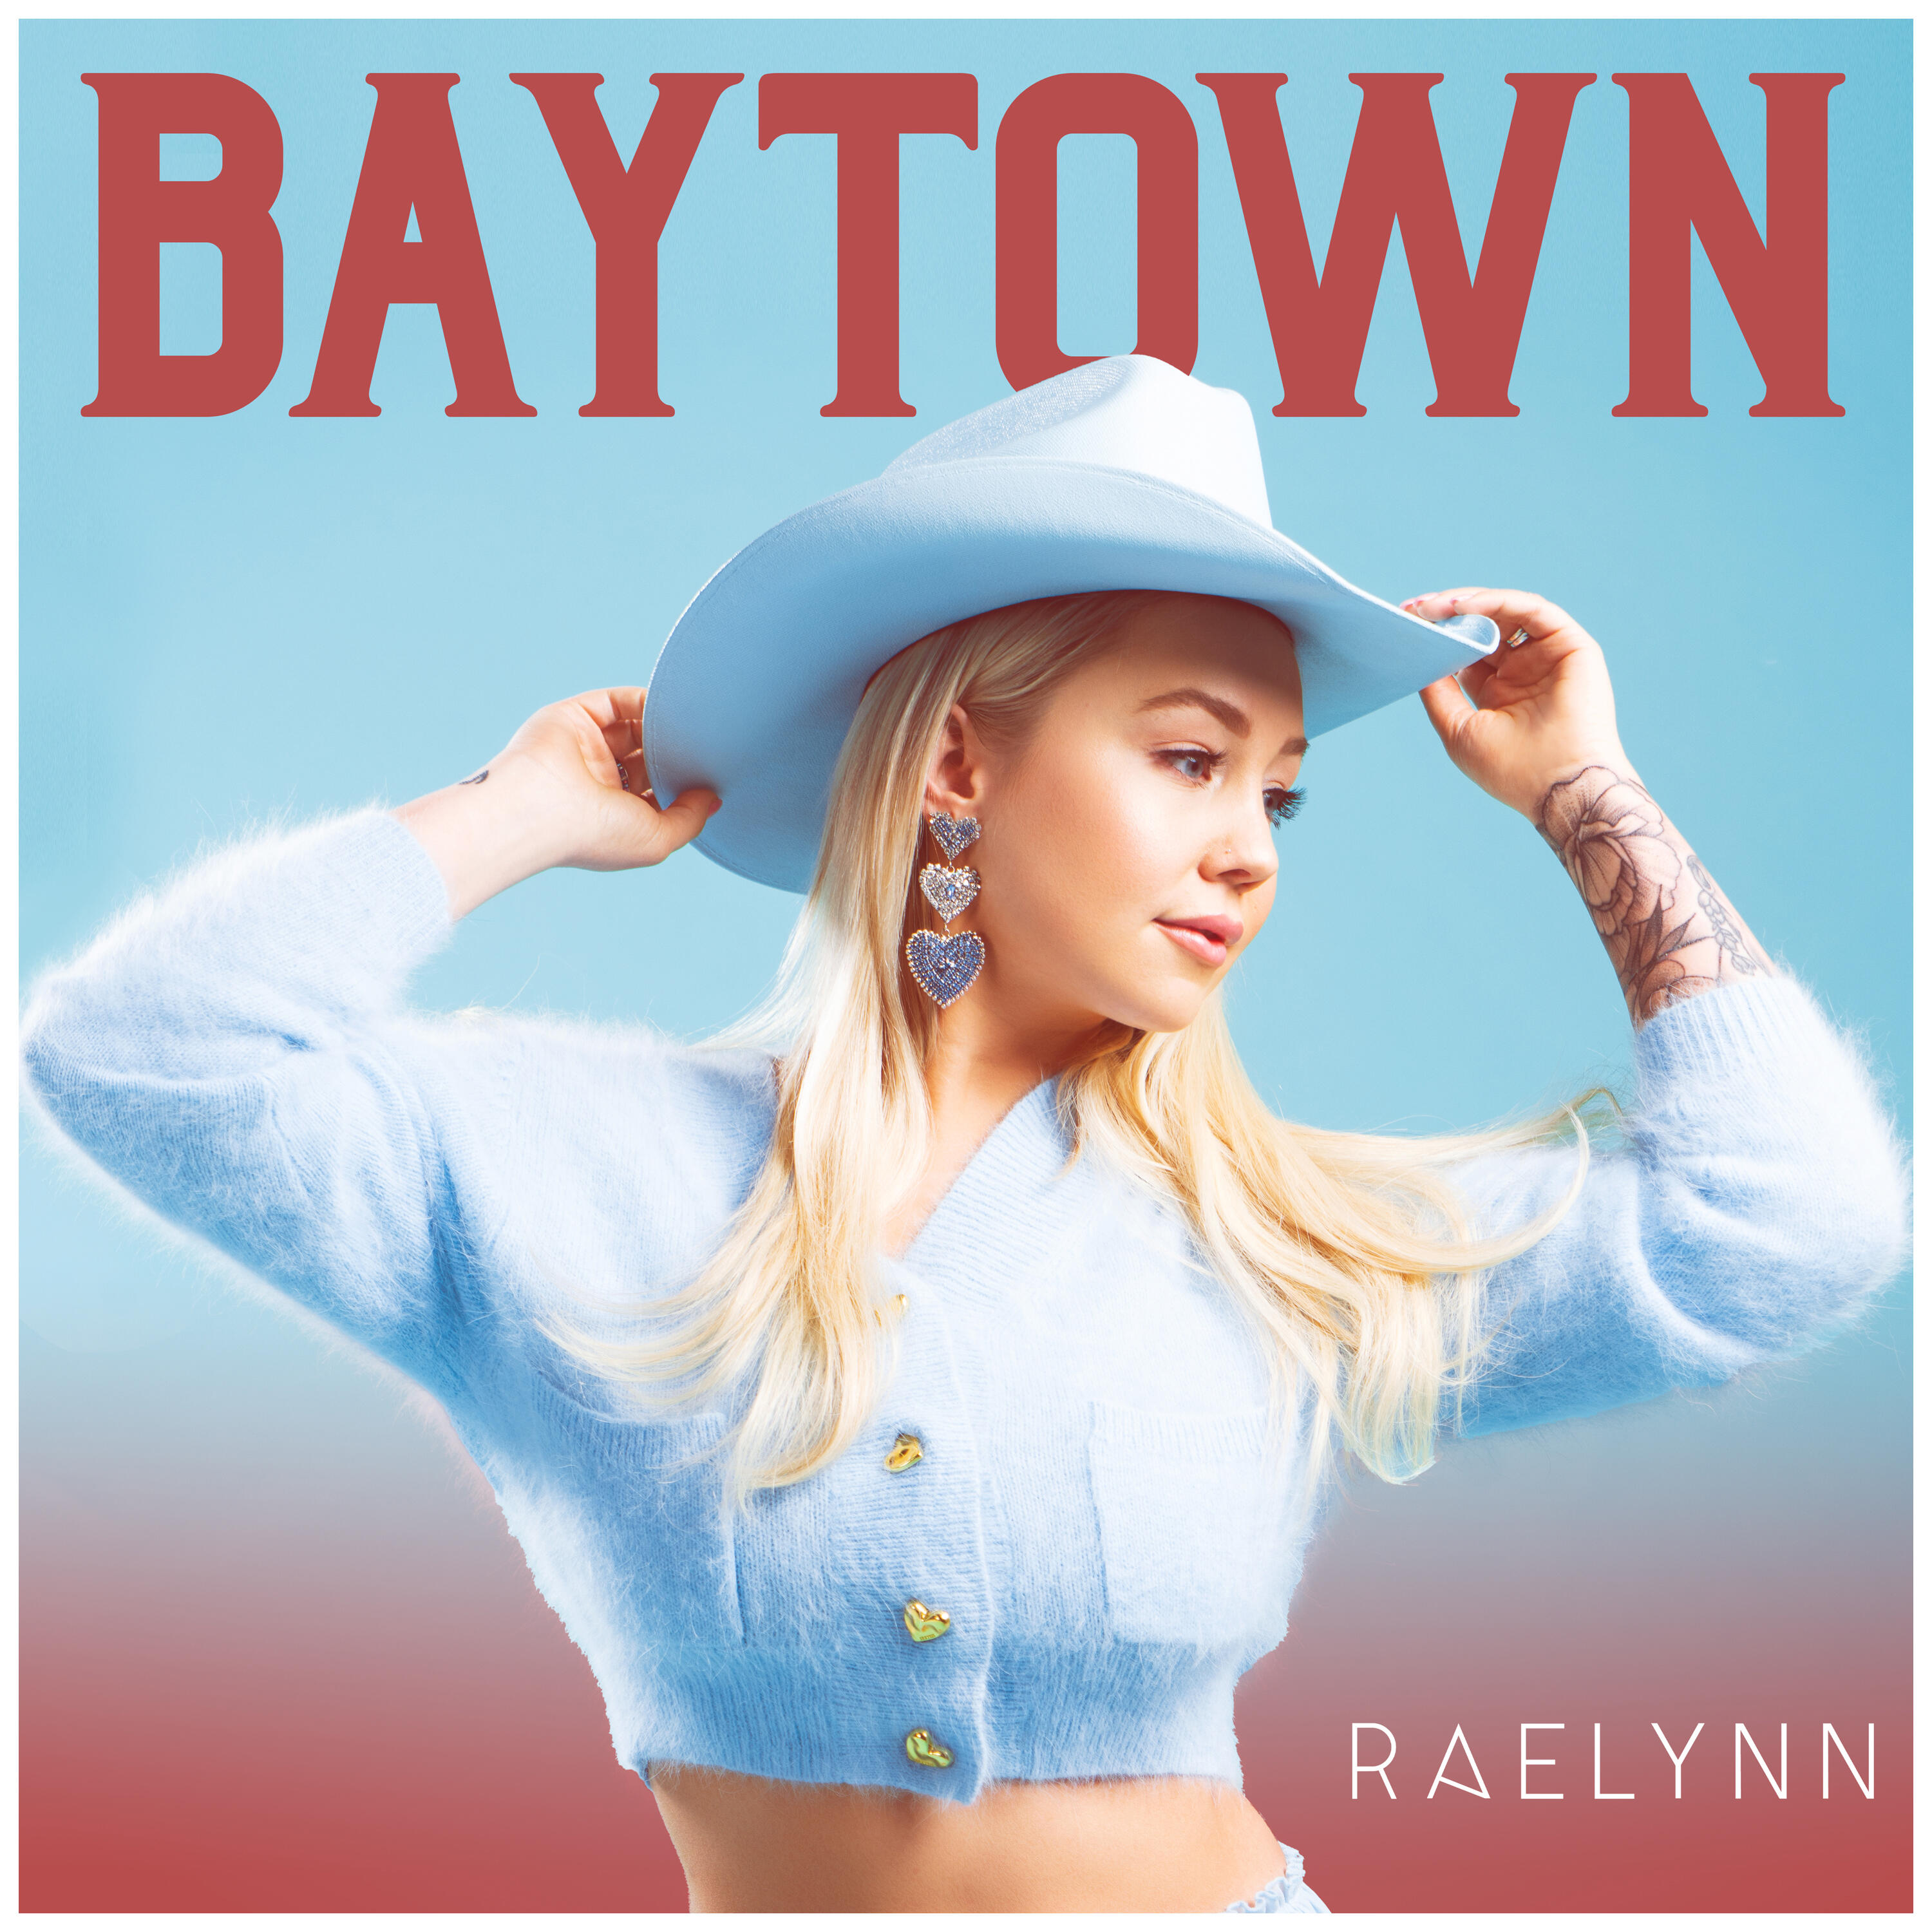 Stream Free Songs By Raelynn And Similar Artists Iheartradio 